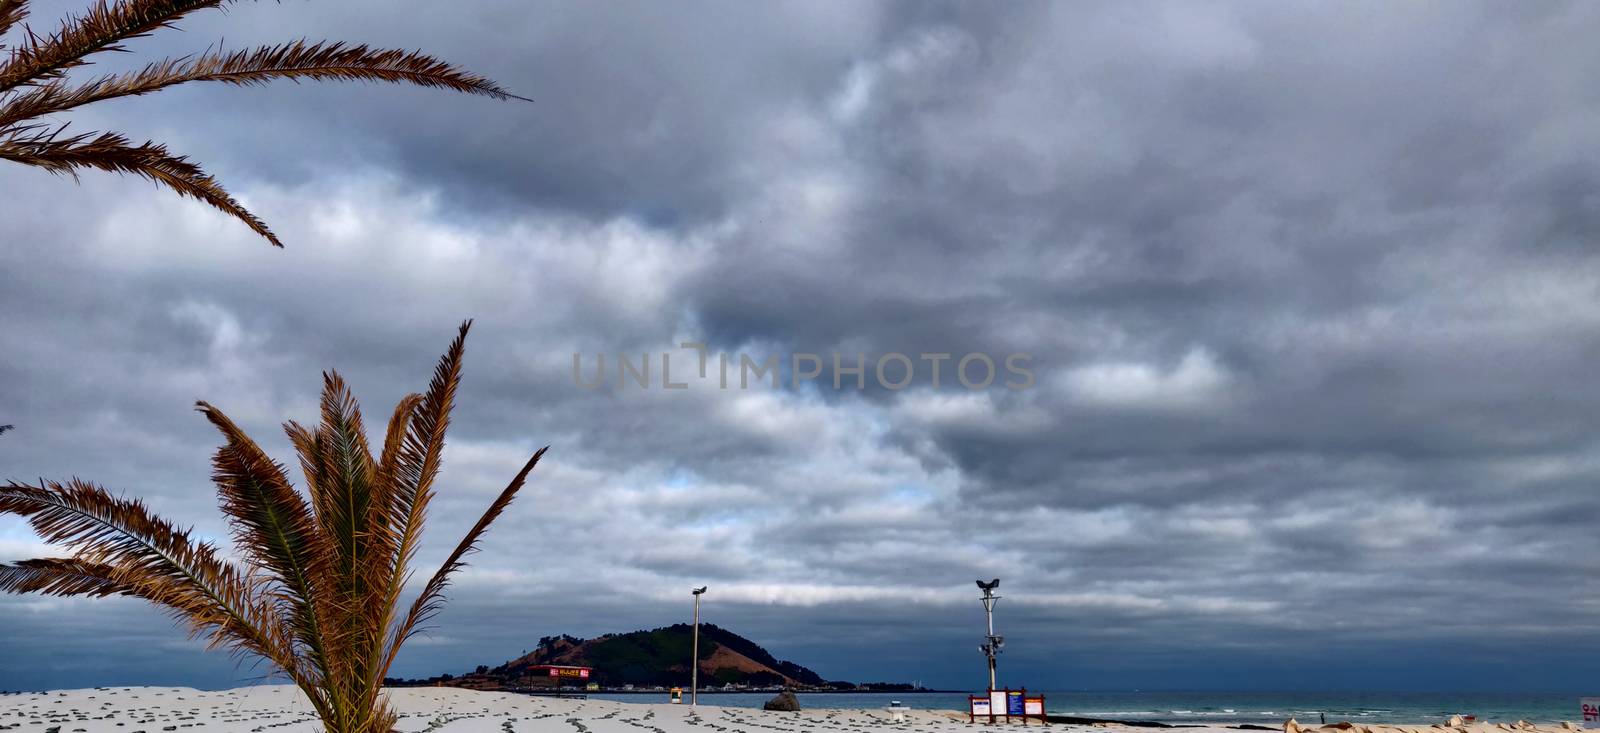 Cloudy sky with spike plant on beach in foreground by mshivangi92